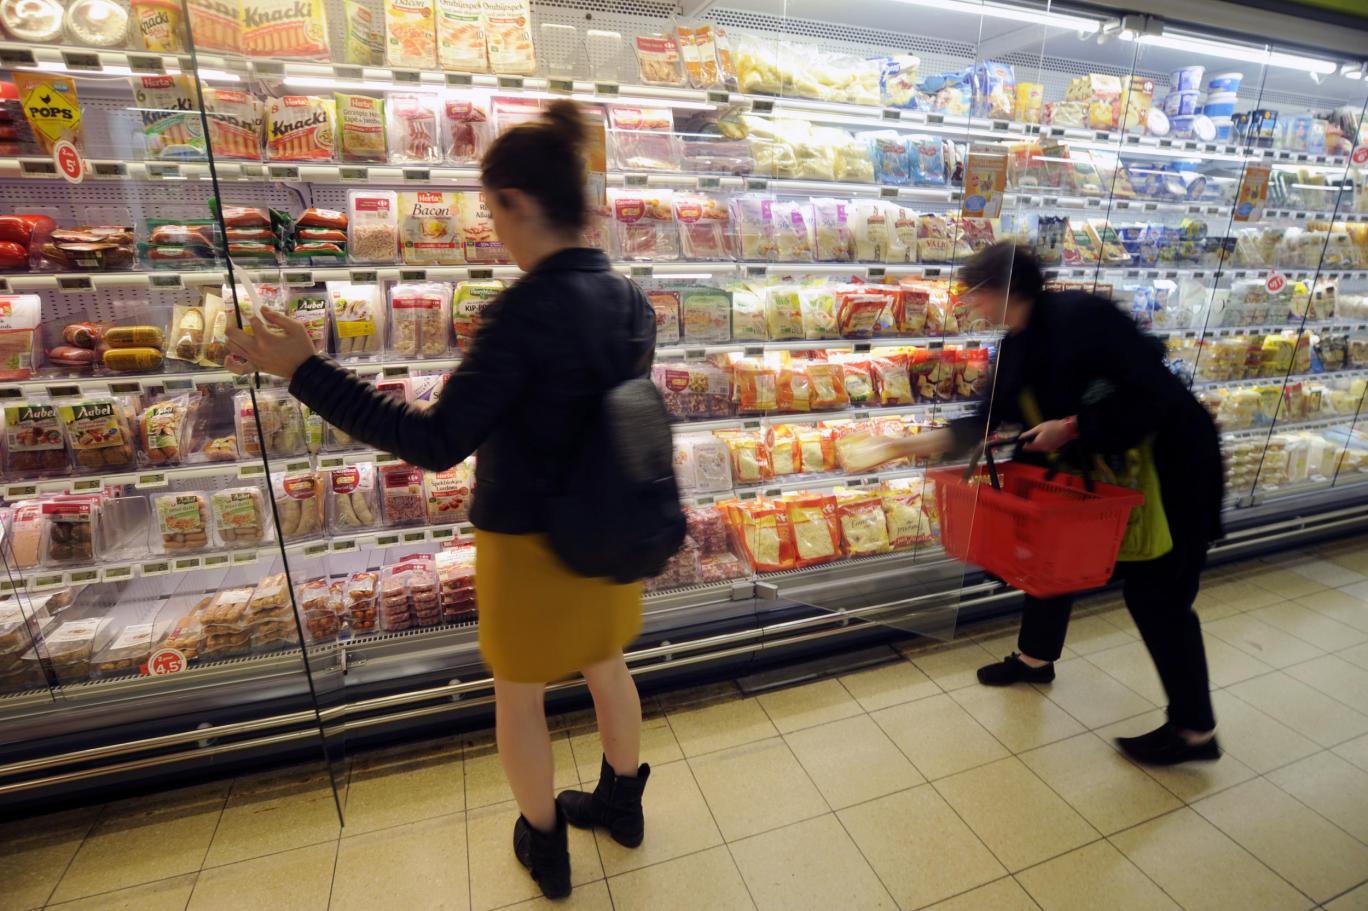 France Bans Supermarkets From Spoiling Unsold Food, Asks Them To Donate To Charities